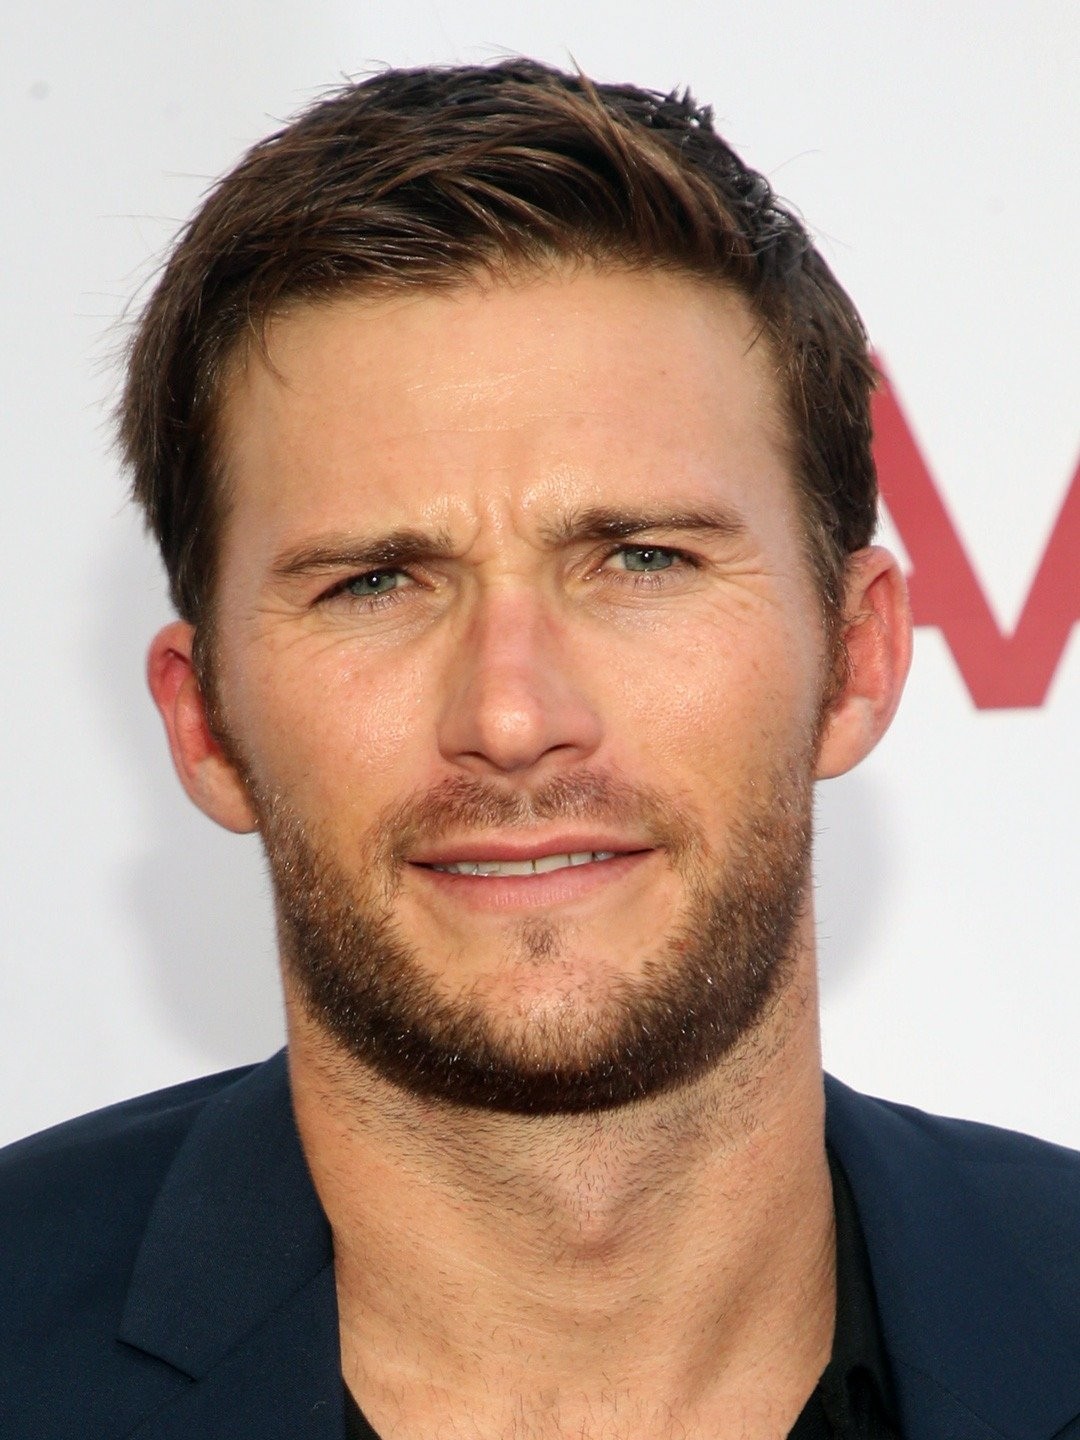 The Longest Ride - Have you seen Scott Eastwood as Luke Collins in The  Longest Ride? Now playing in theaters!